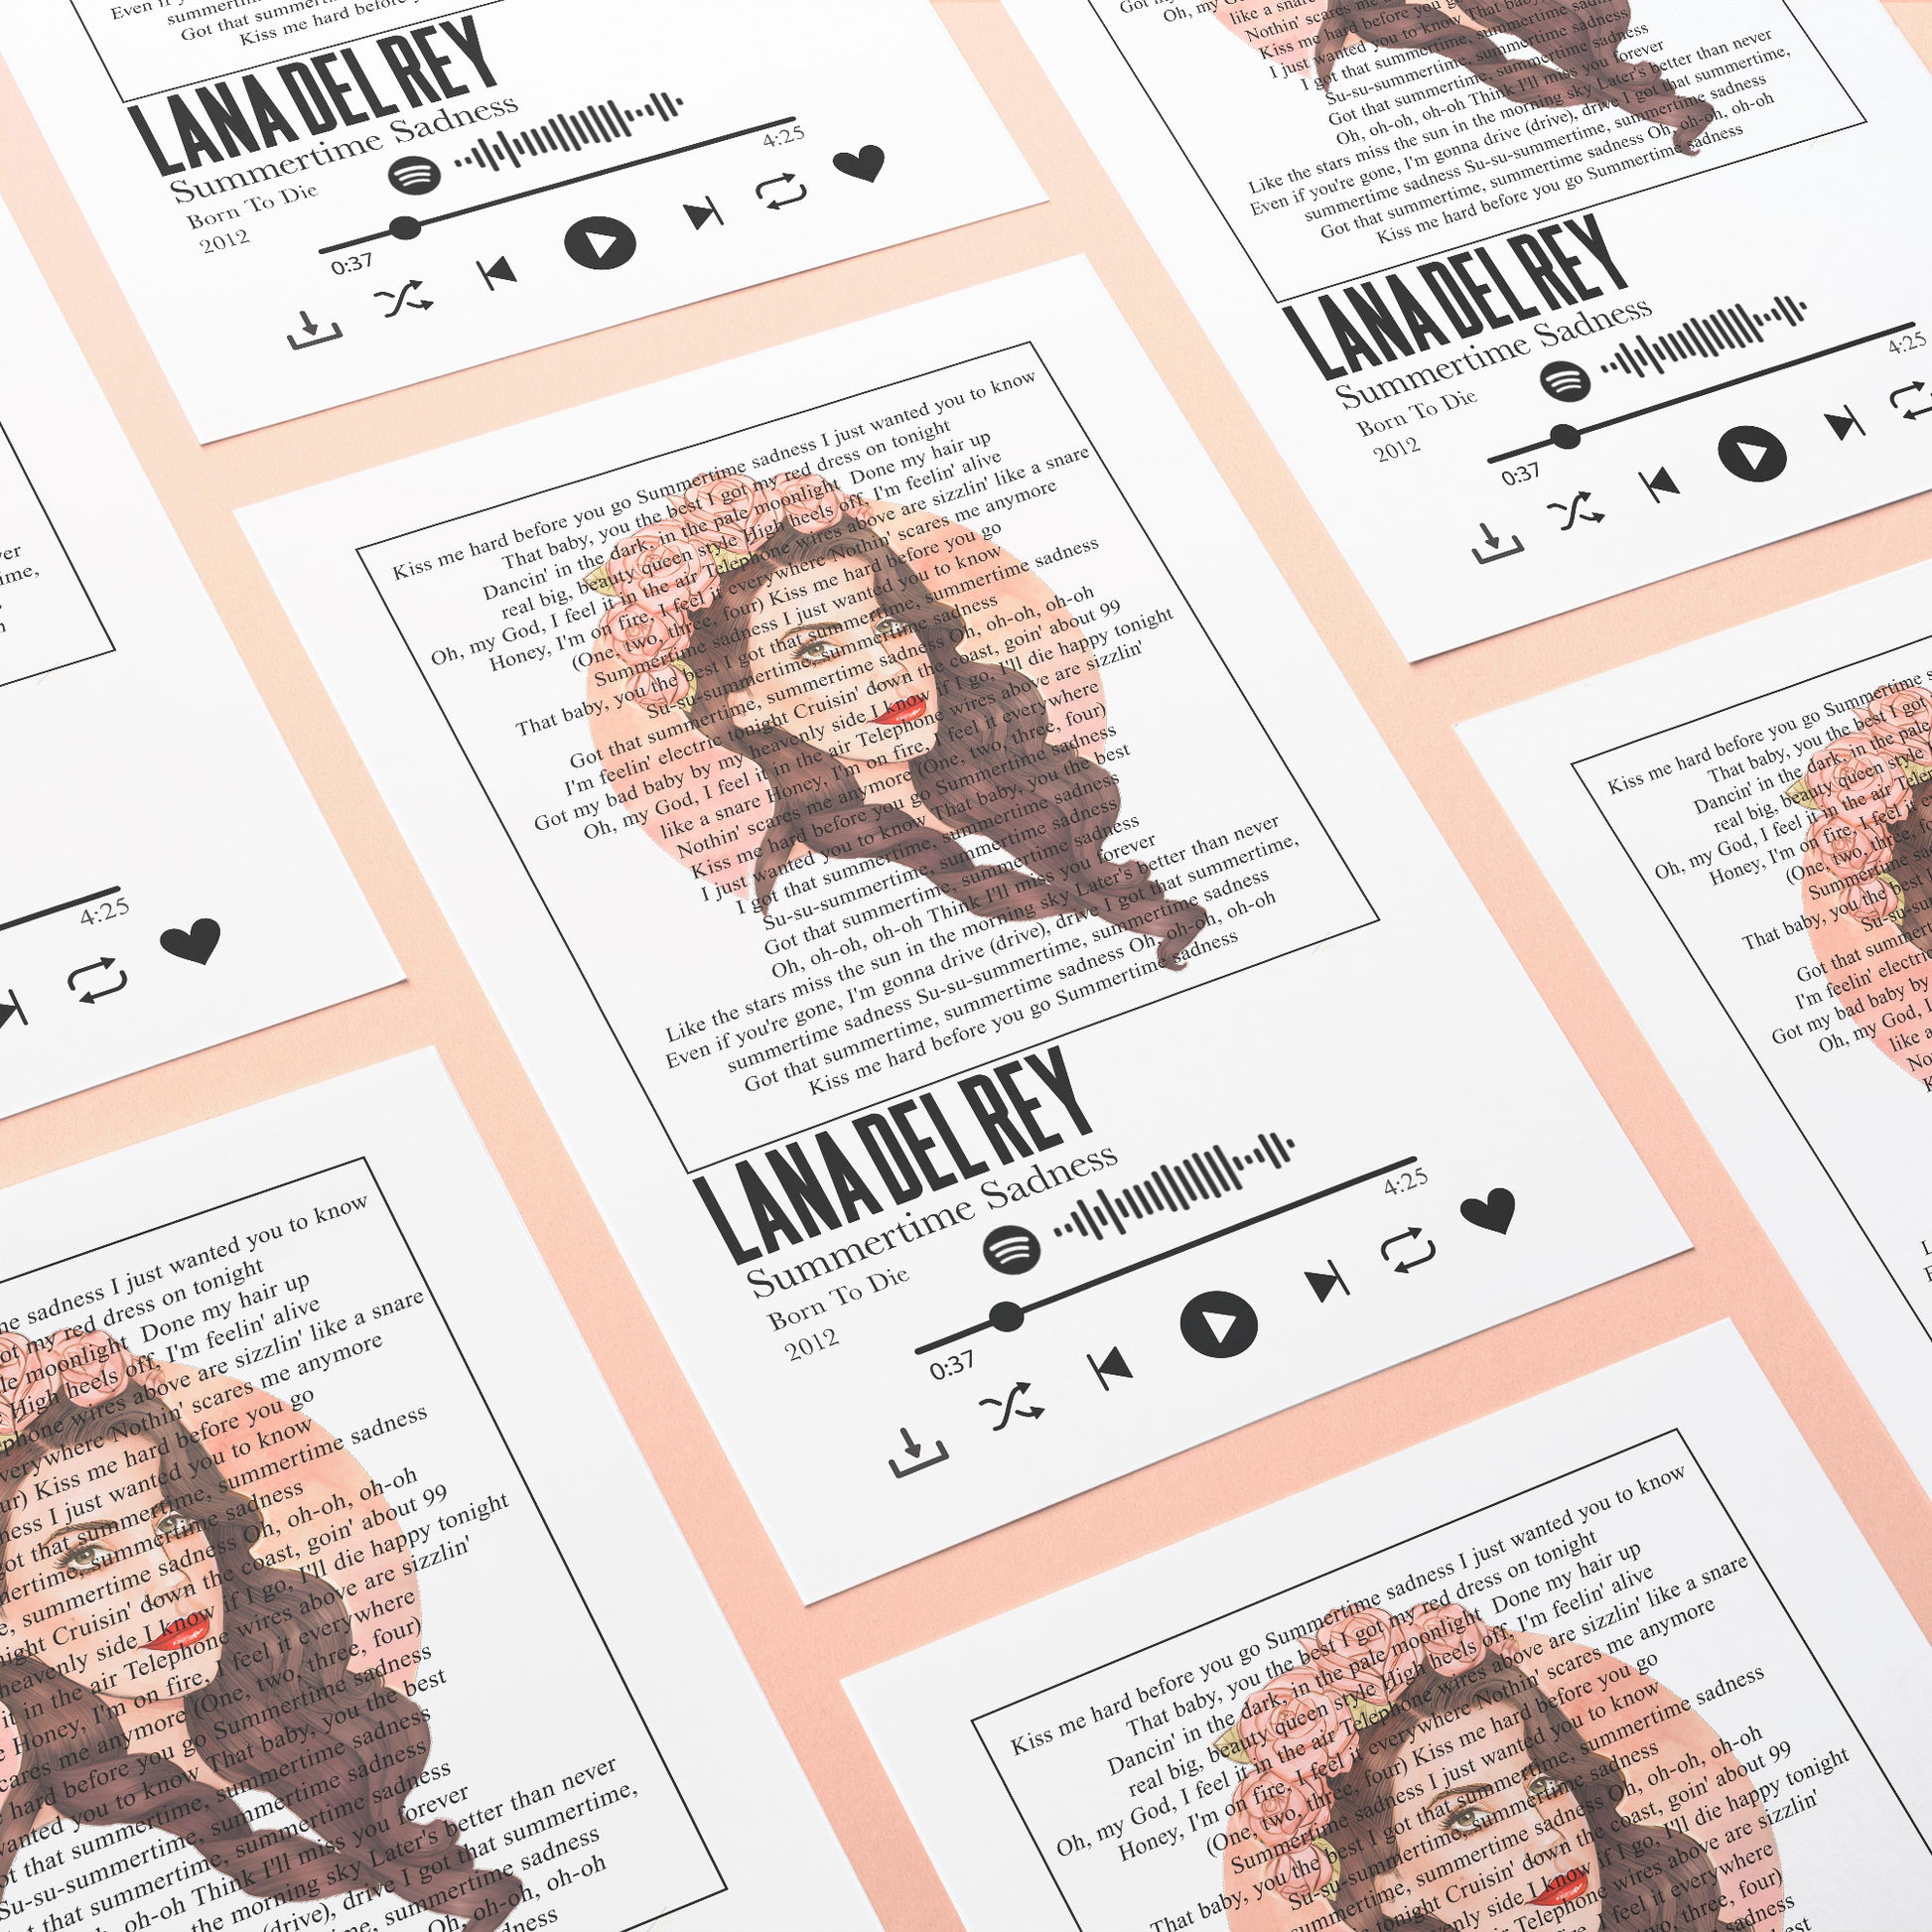 Introducing the Lana del Rey - Summertime Sadness Prints - your perfect way to bring the summer blues to life! Featuring your favourite song lyrics on prints, posters, and prints, decorate your walls with unique pieces of personalised art. Choose your favourite song lyrics from Spotify Music to create something truly special. Let the artist inside you shine!